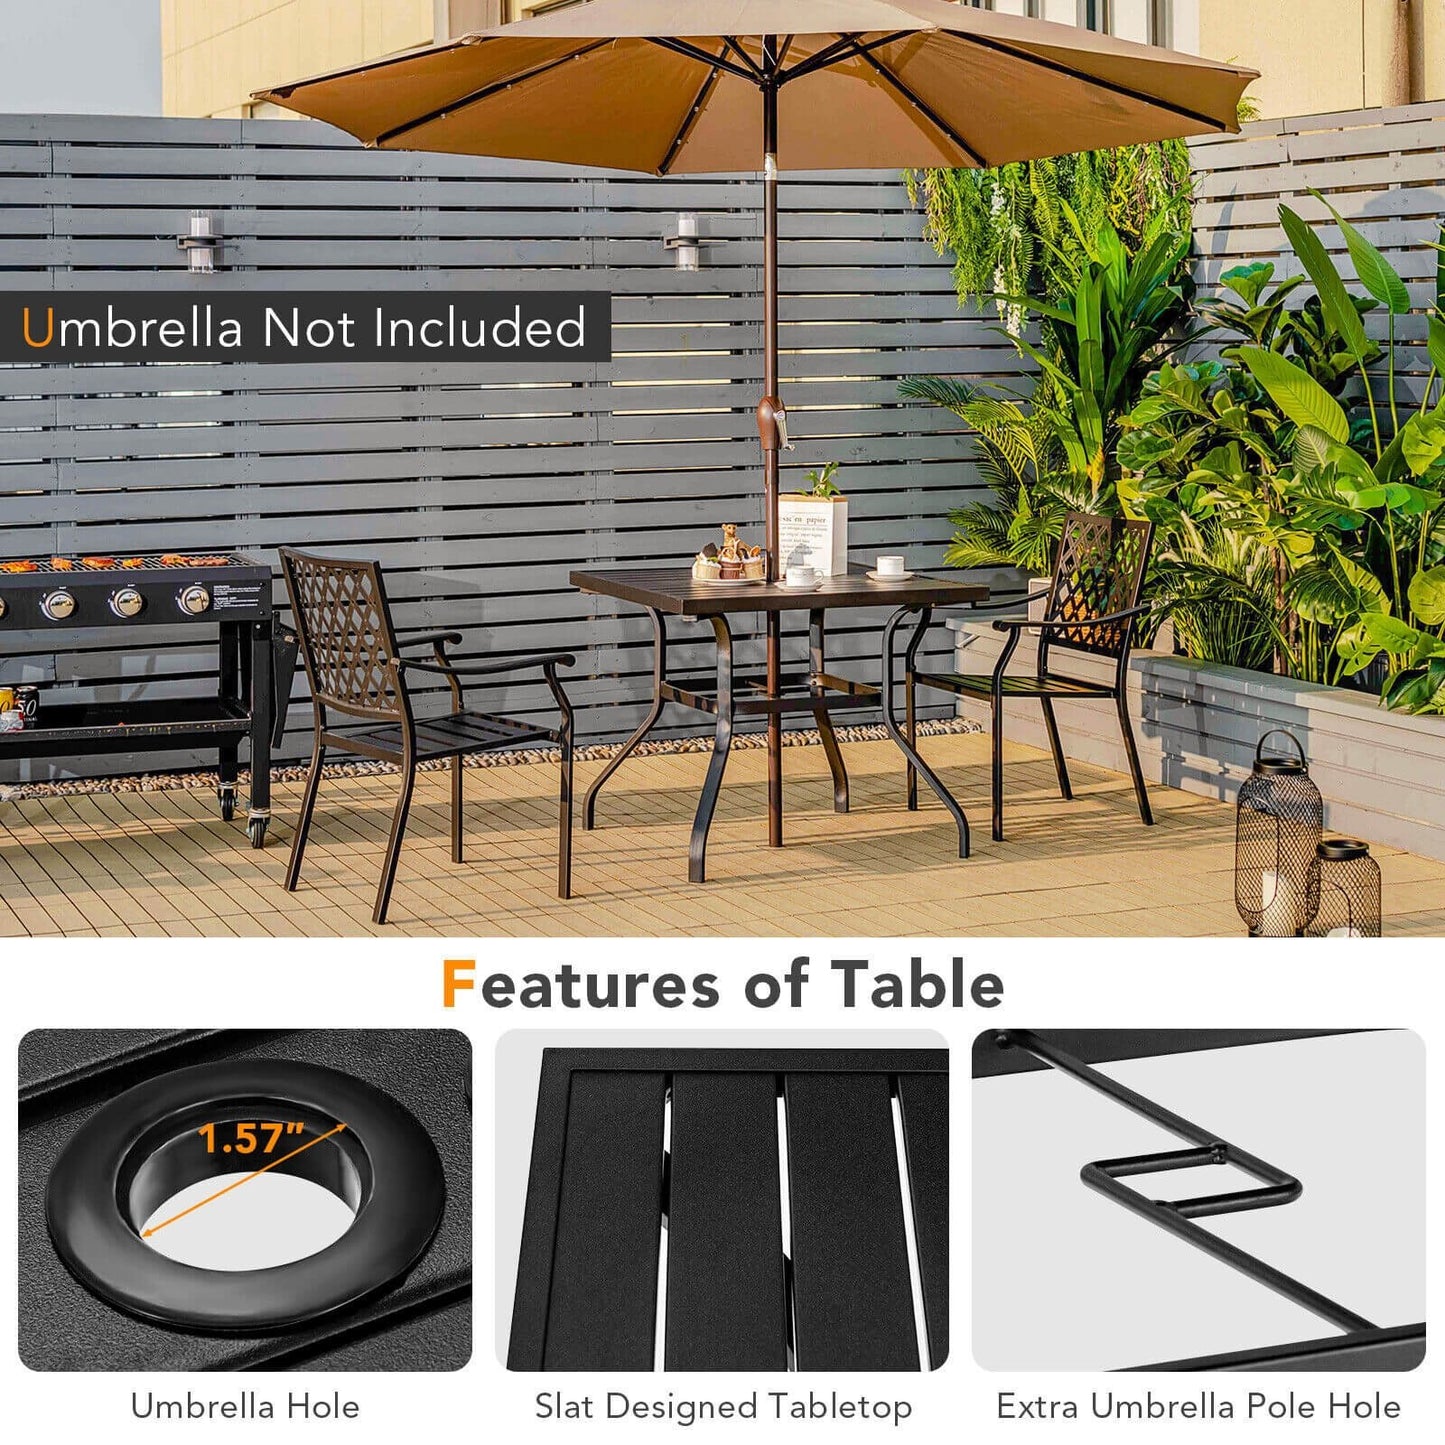 37 Inch Square Patio Dining Table with Umbrella Pole Hole, Black - Gallery Canada